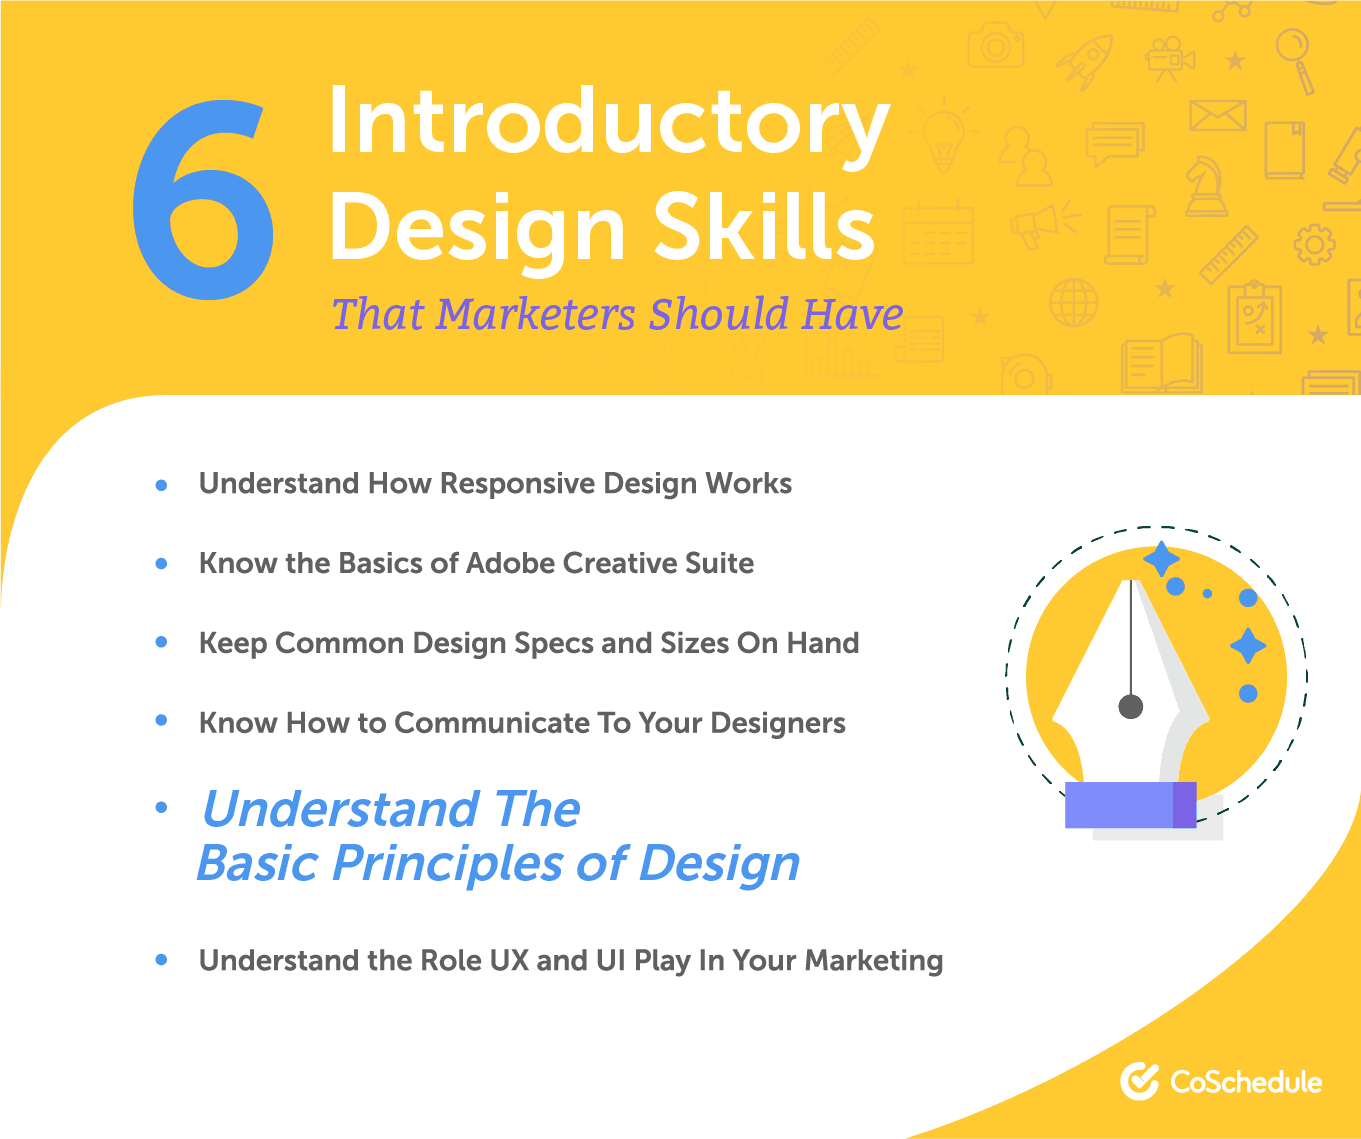 List of 6 introductory design skills marketers should have.